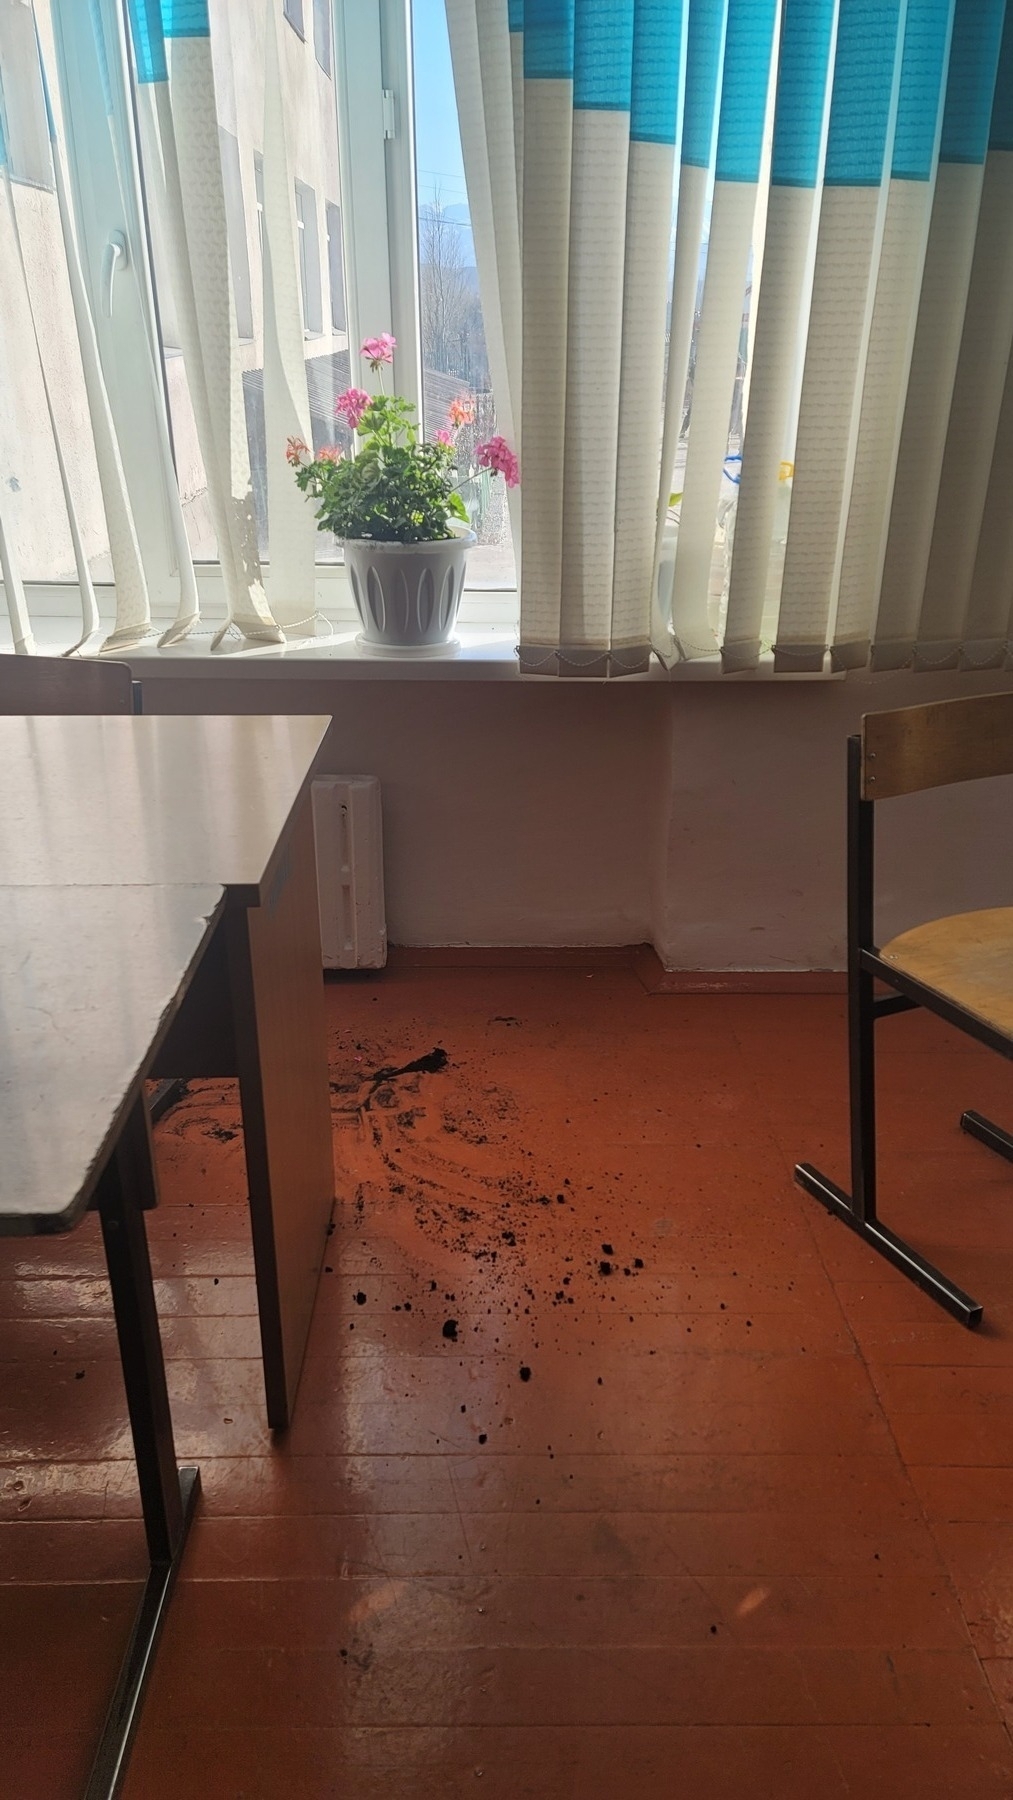 side of a classroom with a couple of desks and chair visible. flower pot on the windowsill, and a small area of dark soil scattered on the floor